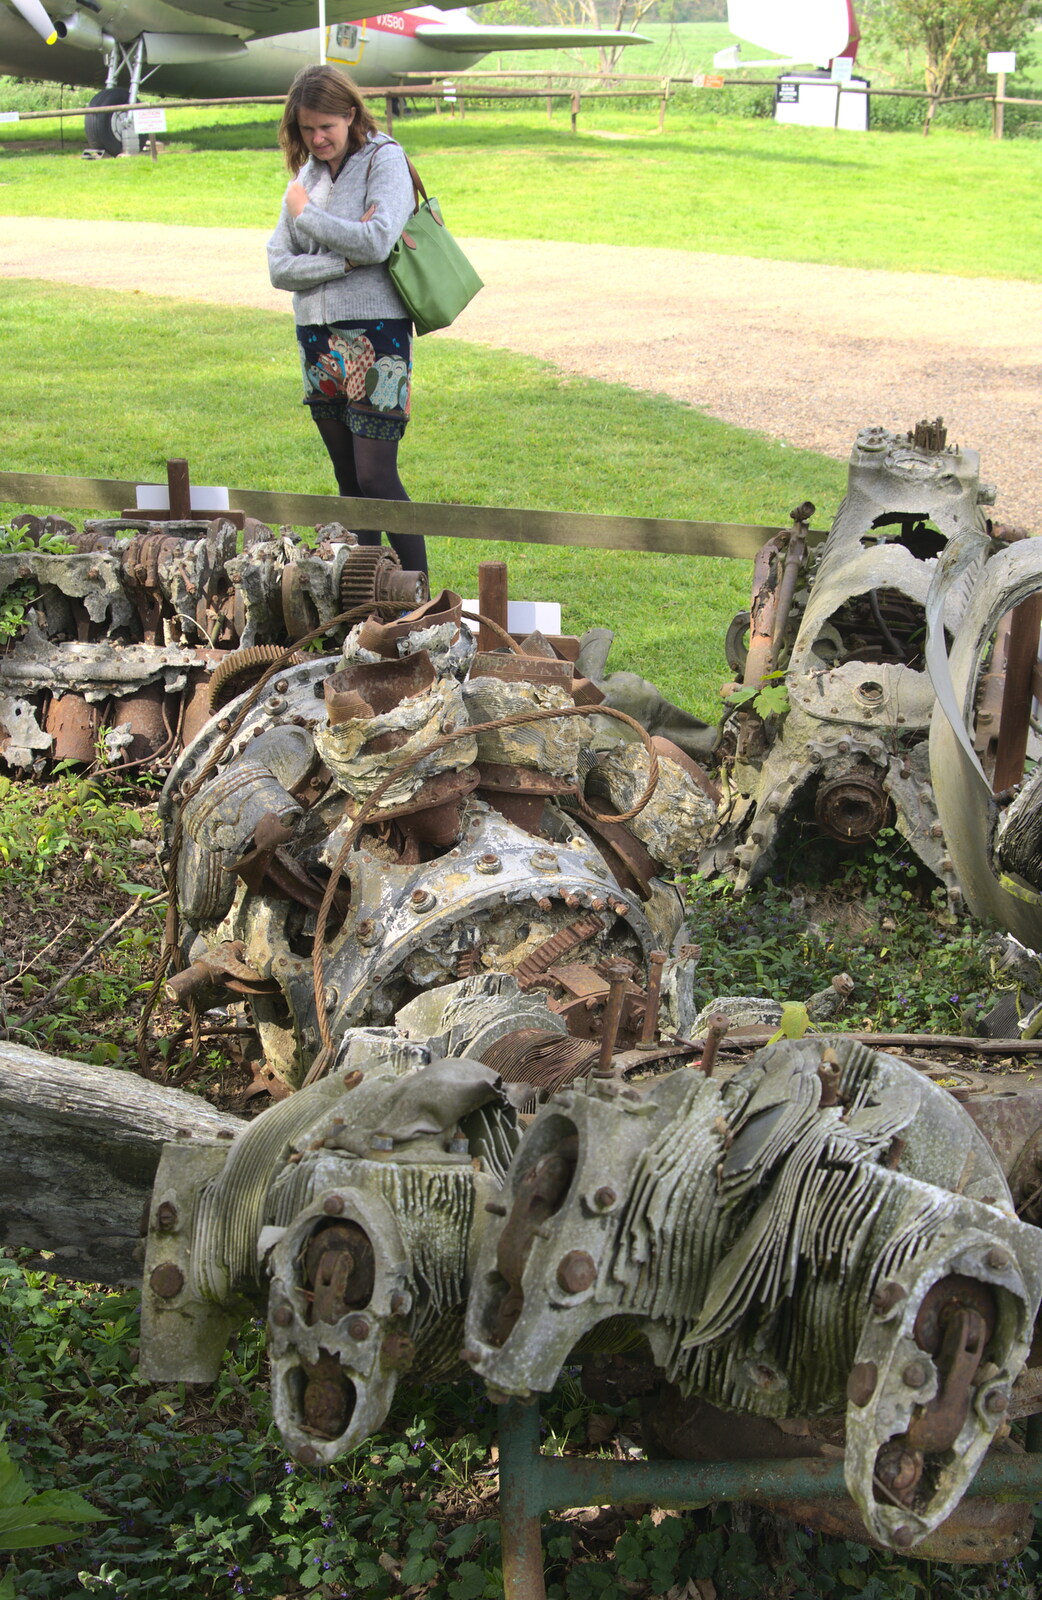 Isobel looks at mangled engines from Norfolk and Suffolk Aviation Museum, Flixton, Suffolk - 30th April 2017